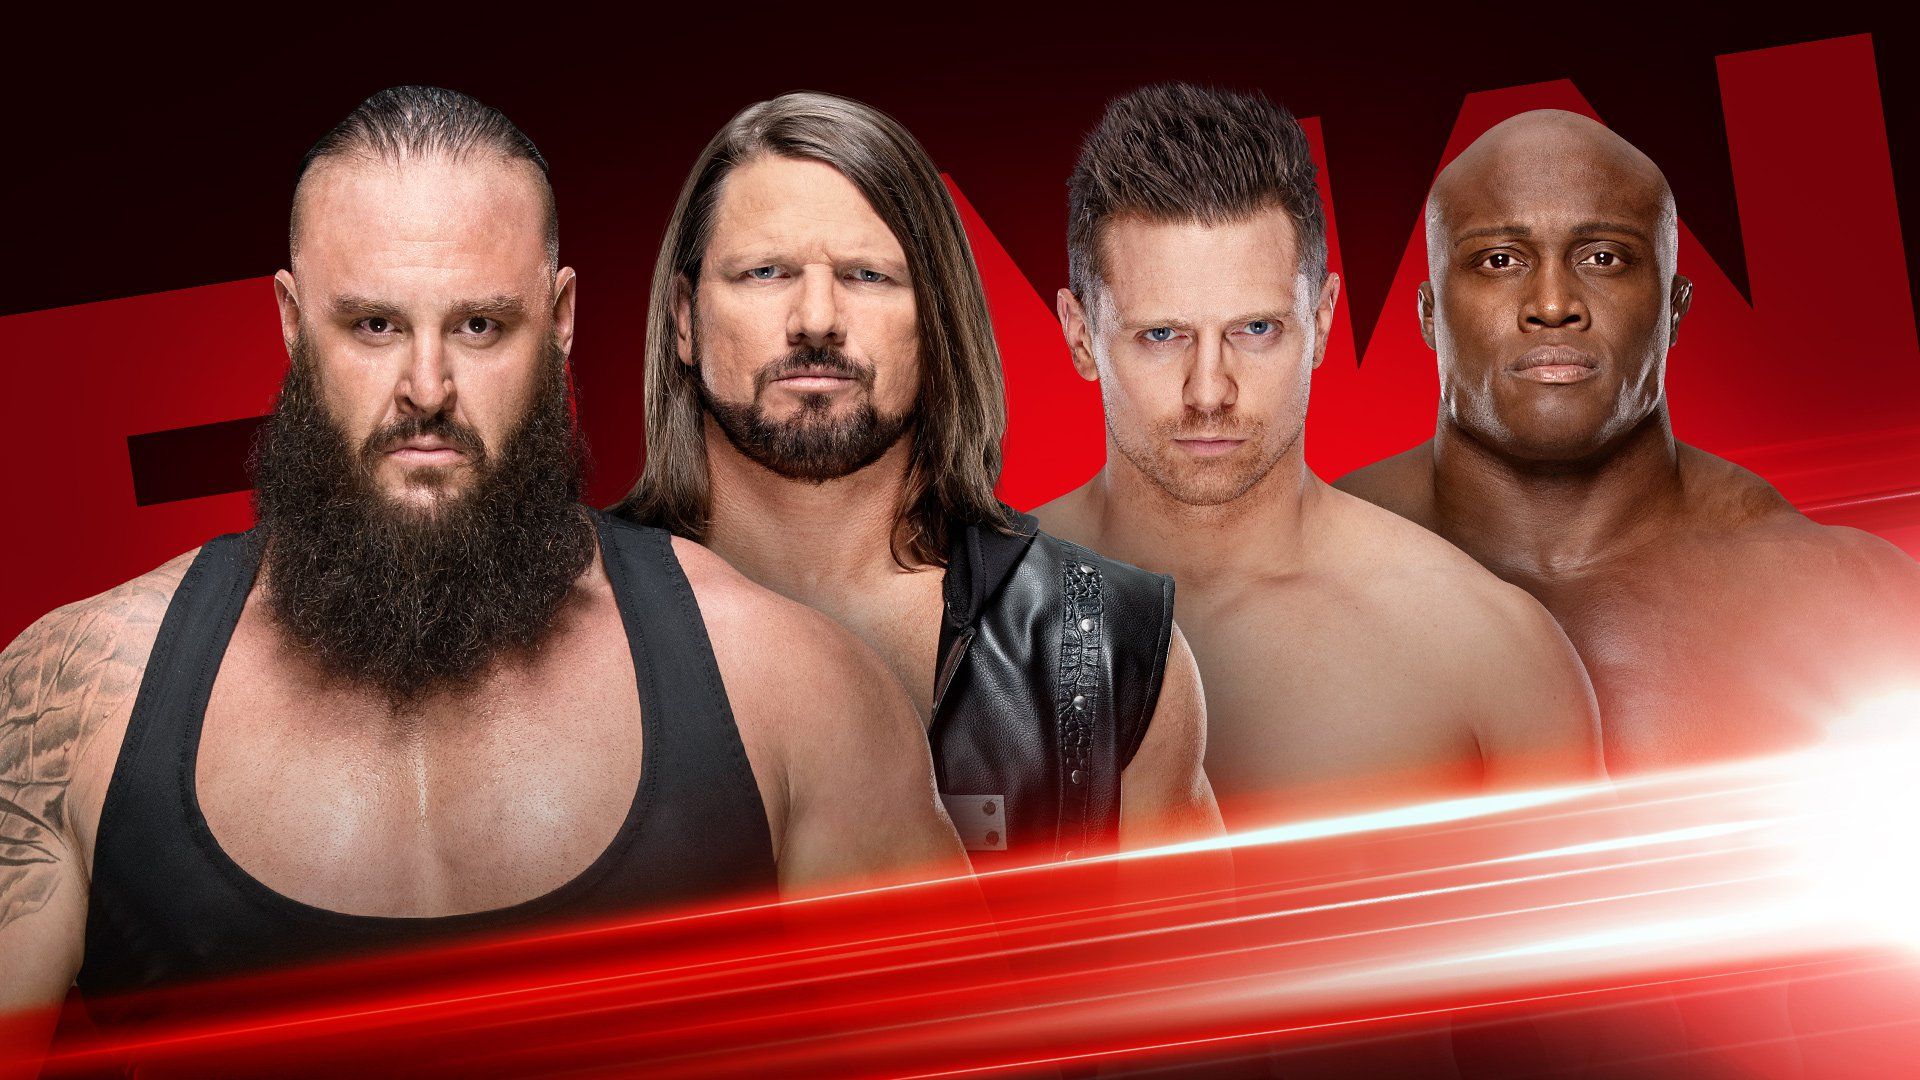 WWE MONDAY NIGHT RAW Highlights For May 2019: No 1 Contender's